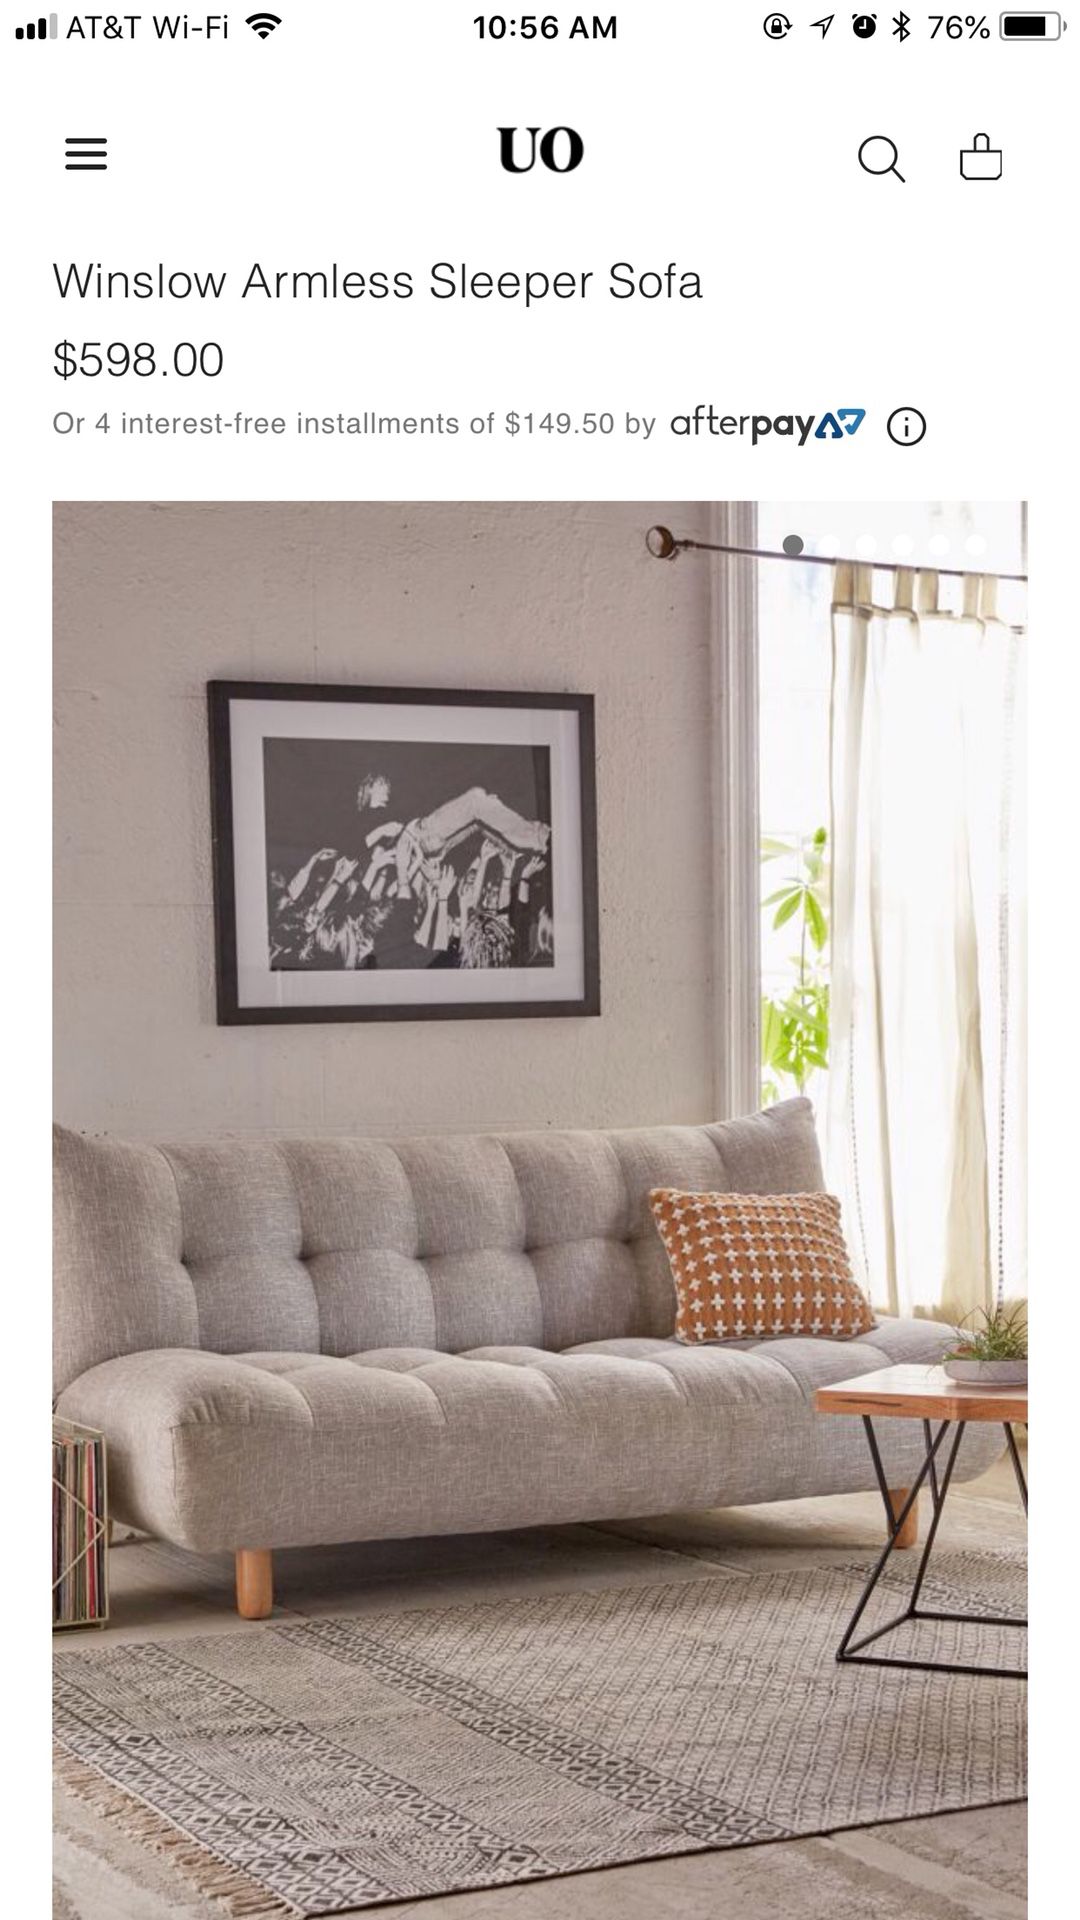 Realistisch cafetaria element Winslow Armless Sleeper Sofa - Urban Outfitters for Sale in Culver City, CA  - OfferUp